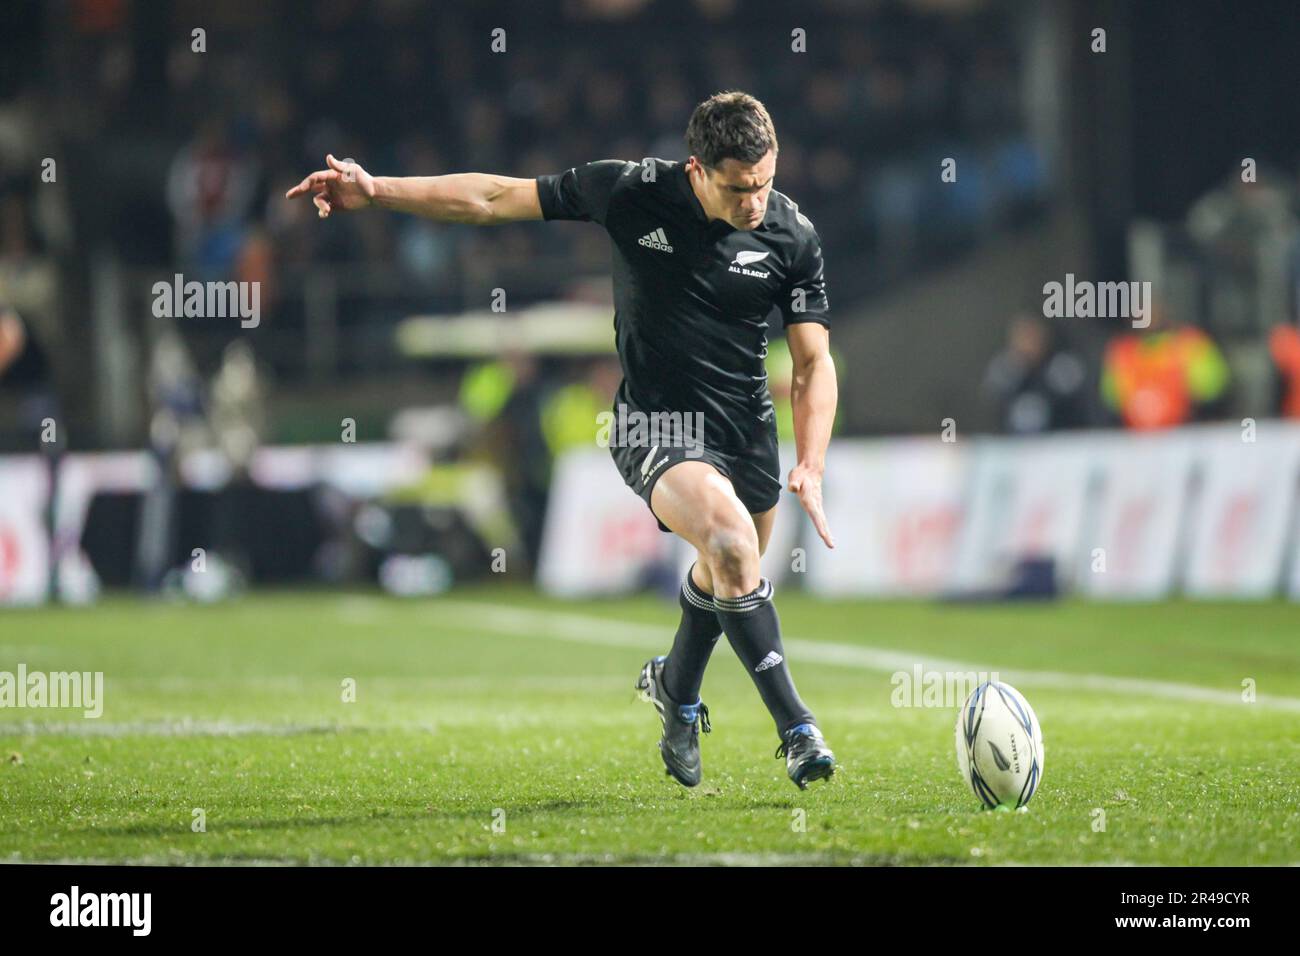 New Zealand’s All Black Dan Carter kicks at goal whilst playing against South Africa in Auckland, New Zealand on Saturday, July 10, 2010. Photo: Sport Stock Photo